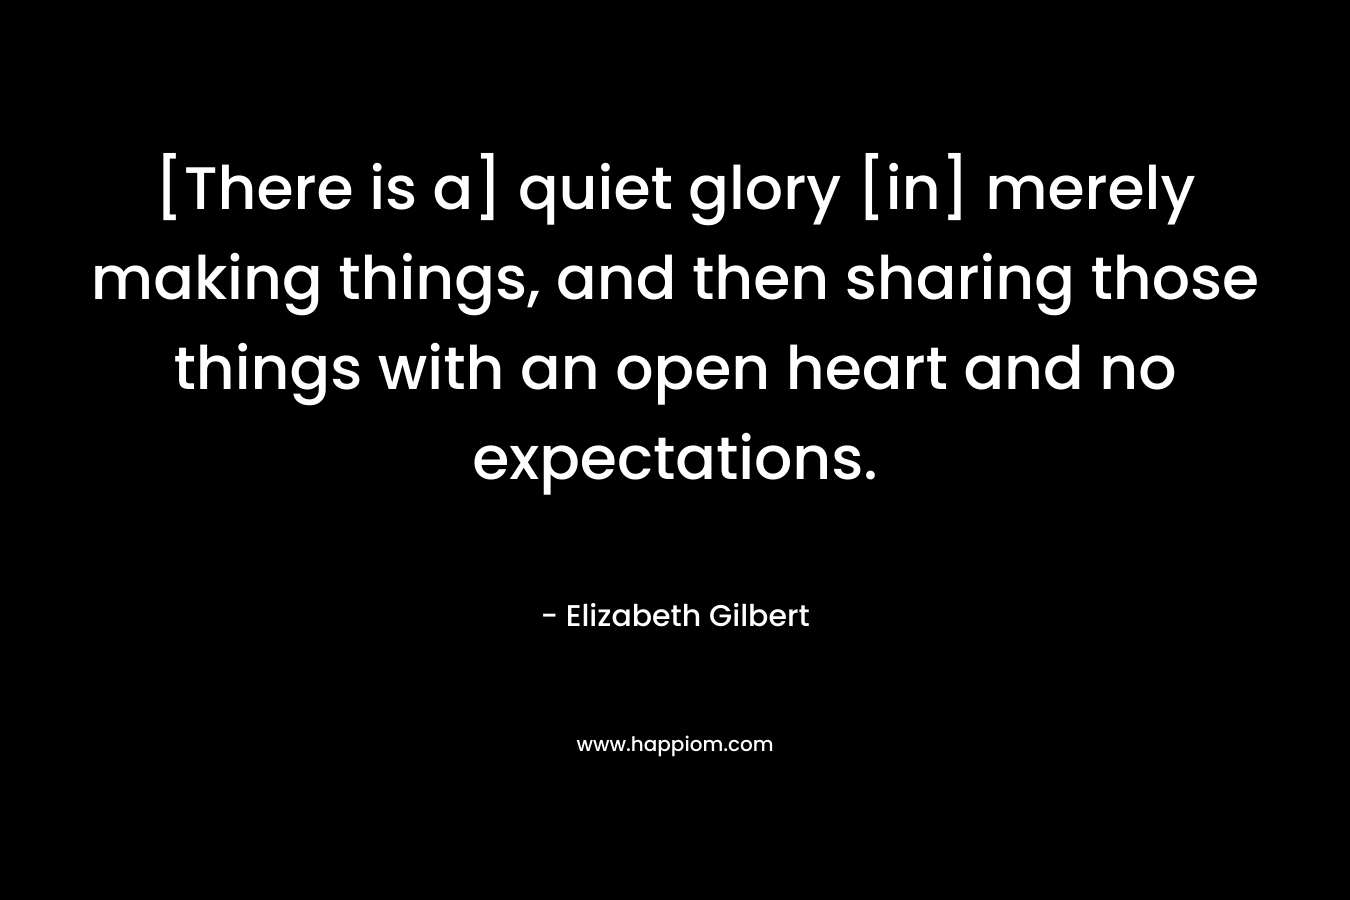 [There is a] quiet glory [in] merely making things, and then sharing those things with an open heart and no expectations.